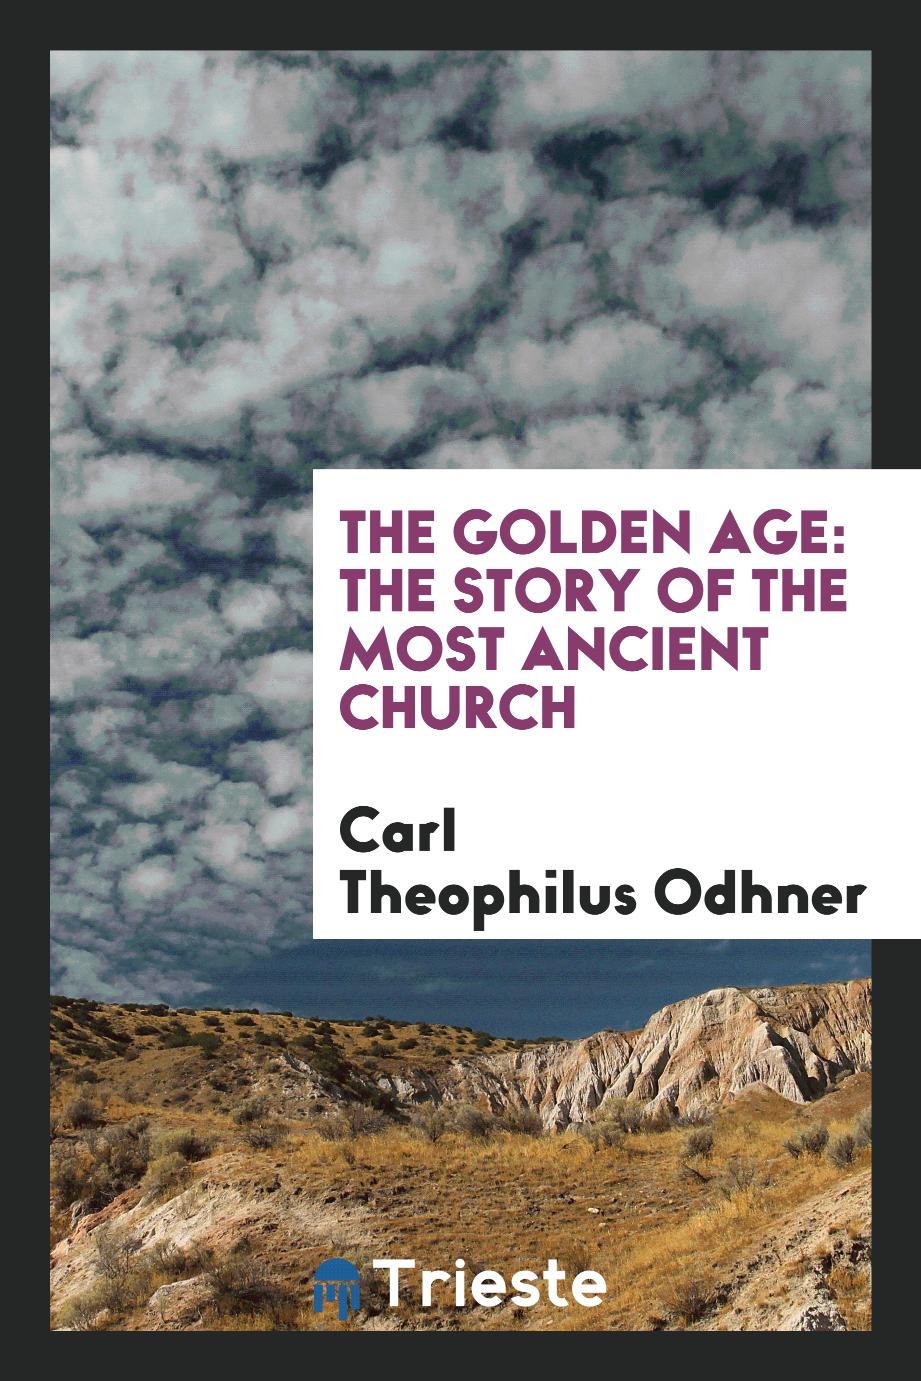 The golden age: the story of the most ancient church